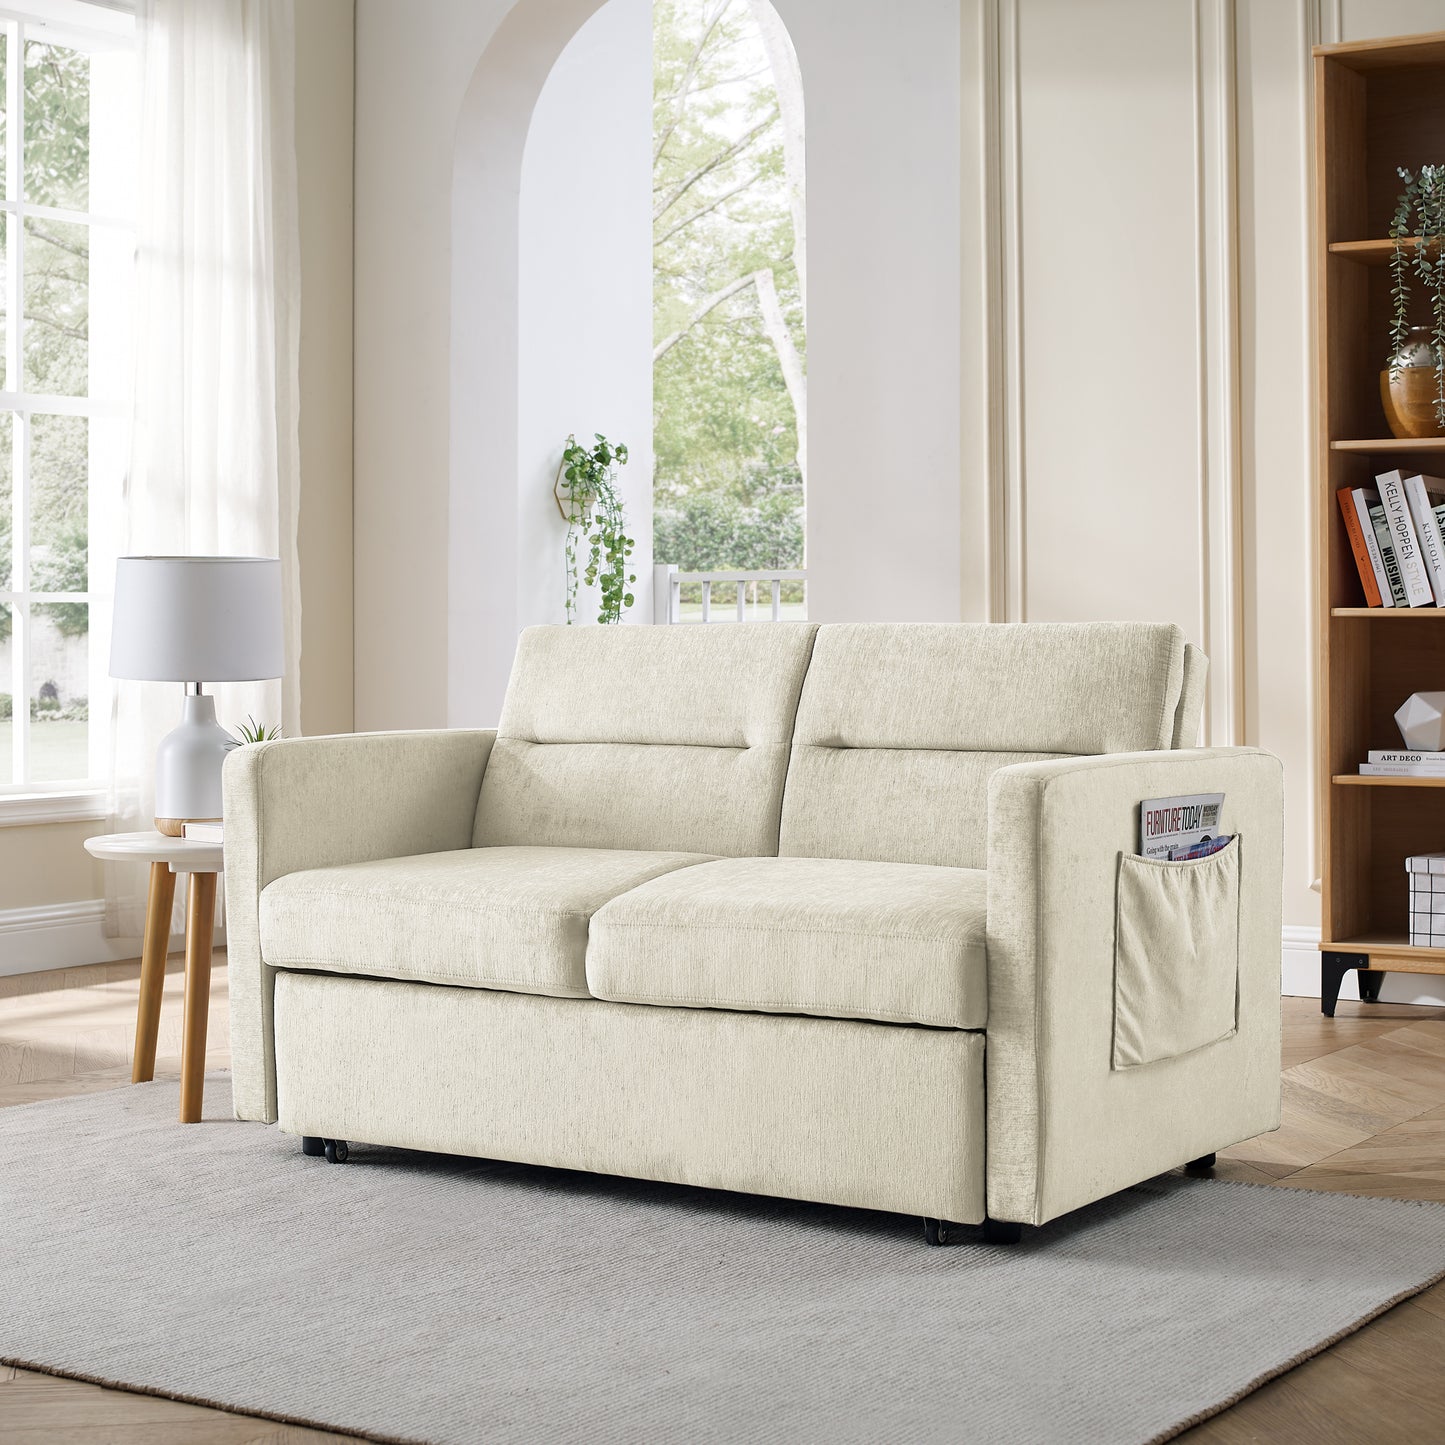 Loveseats Sofa Bed with Pull-out Bed,Adjsutable Back and Two Arm Pocket